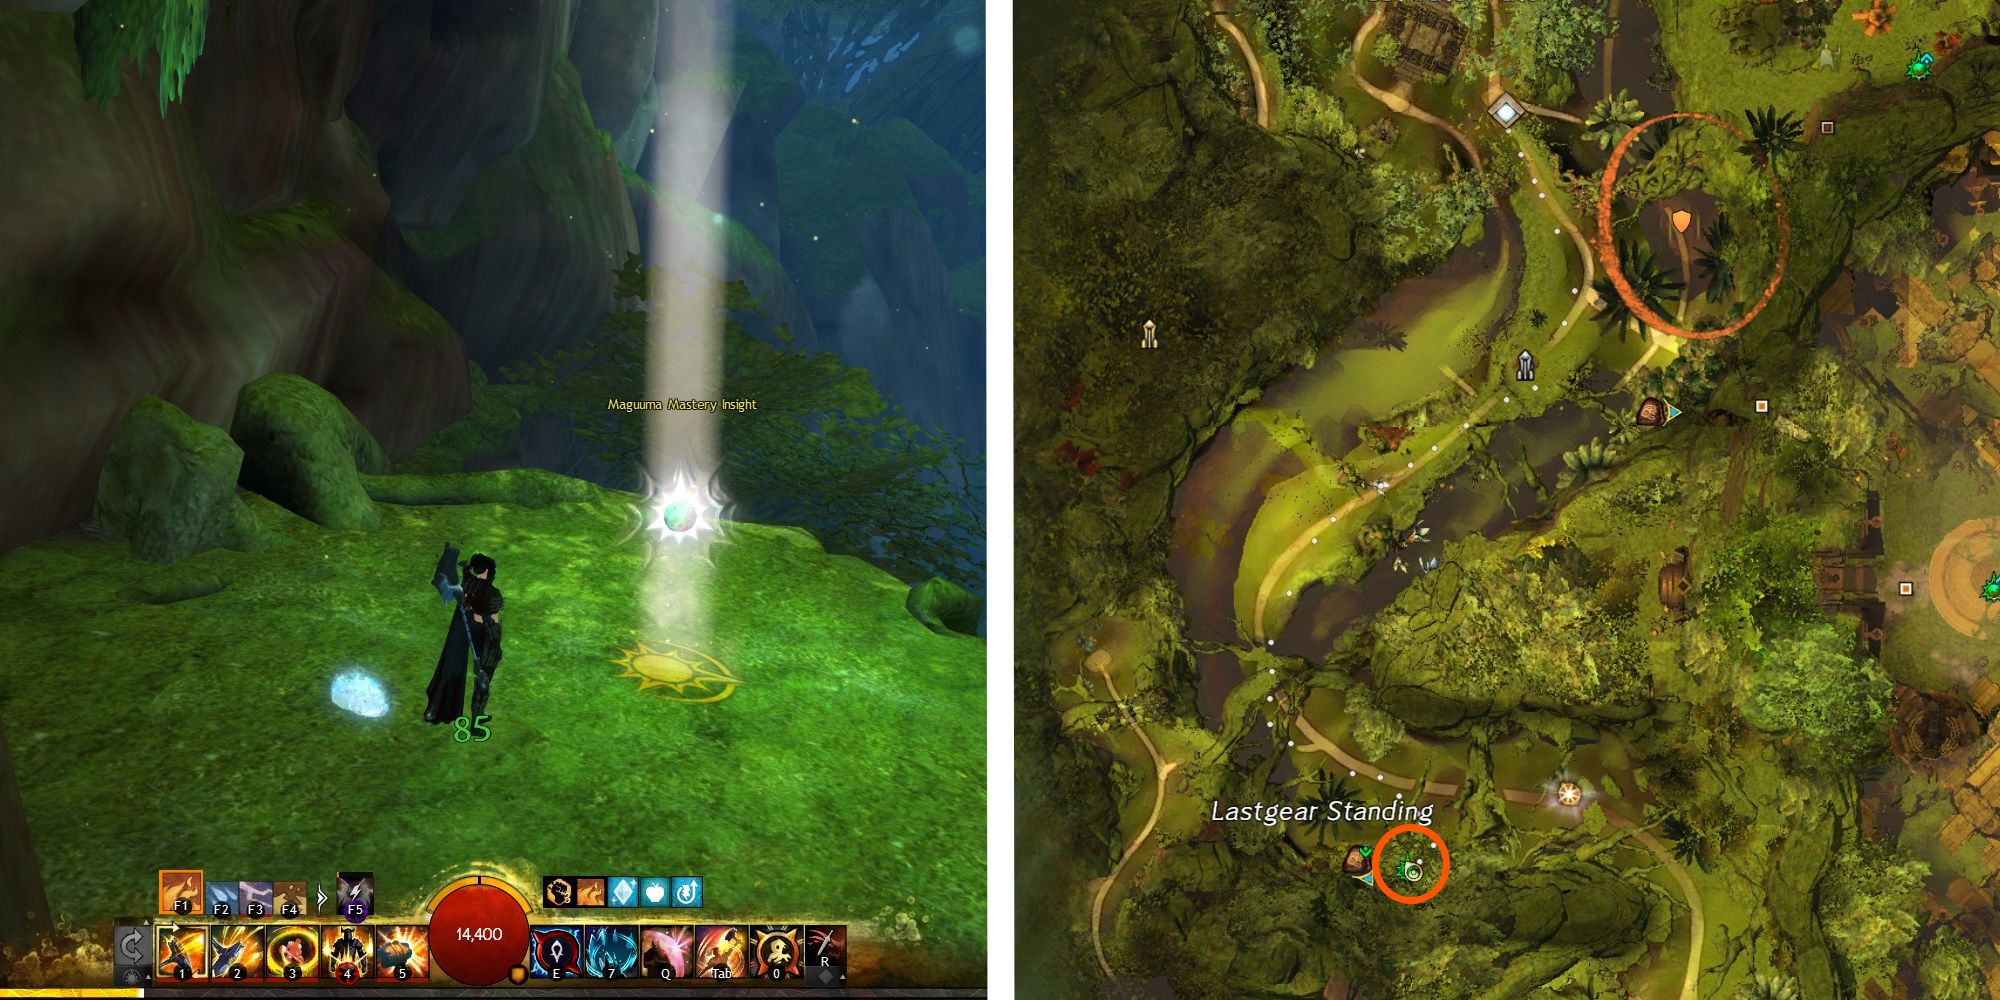 image of player standing at the Lastgear Standing Insight next to image of location on map